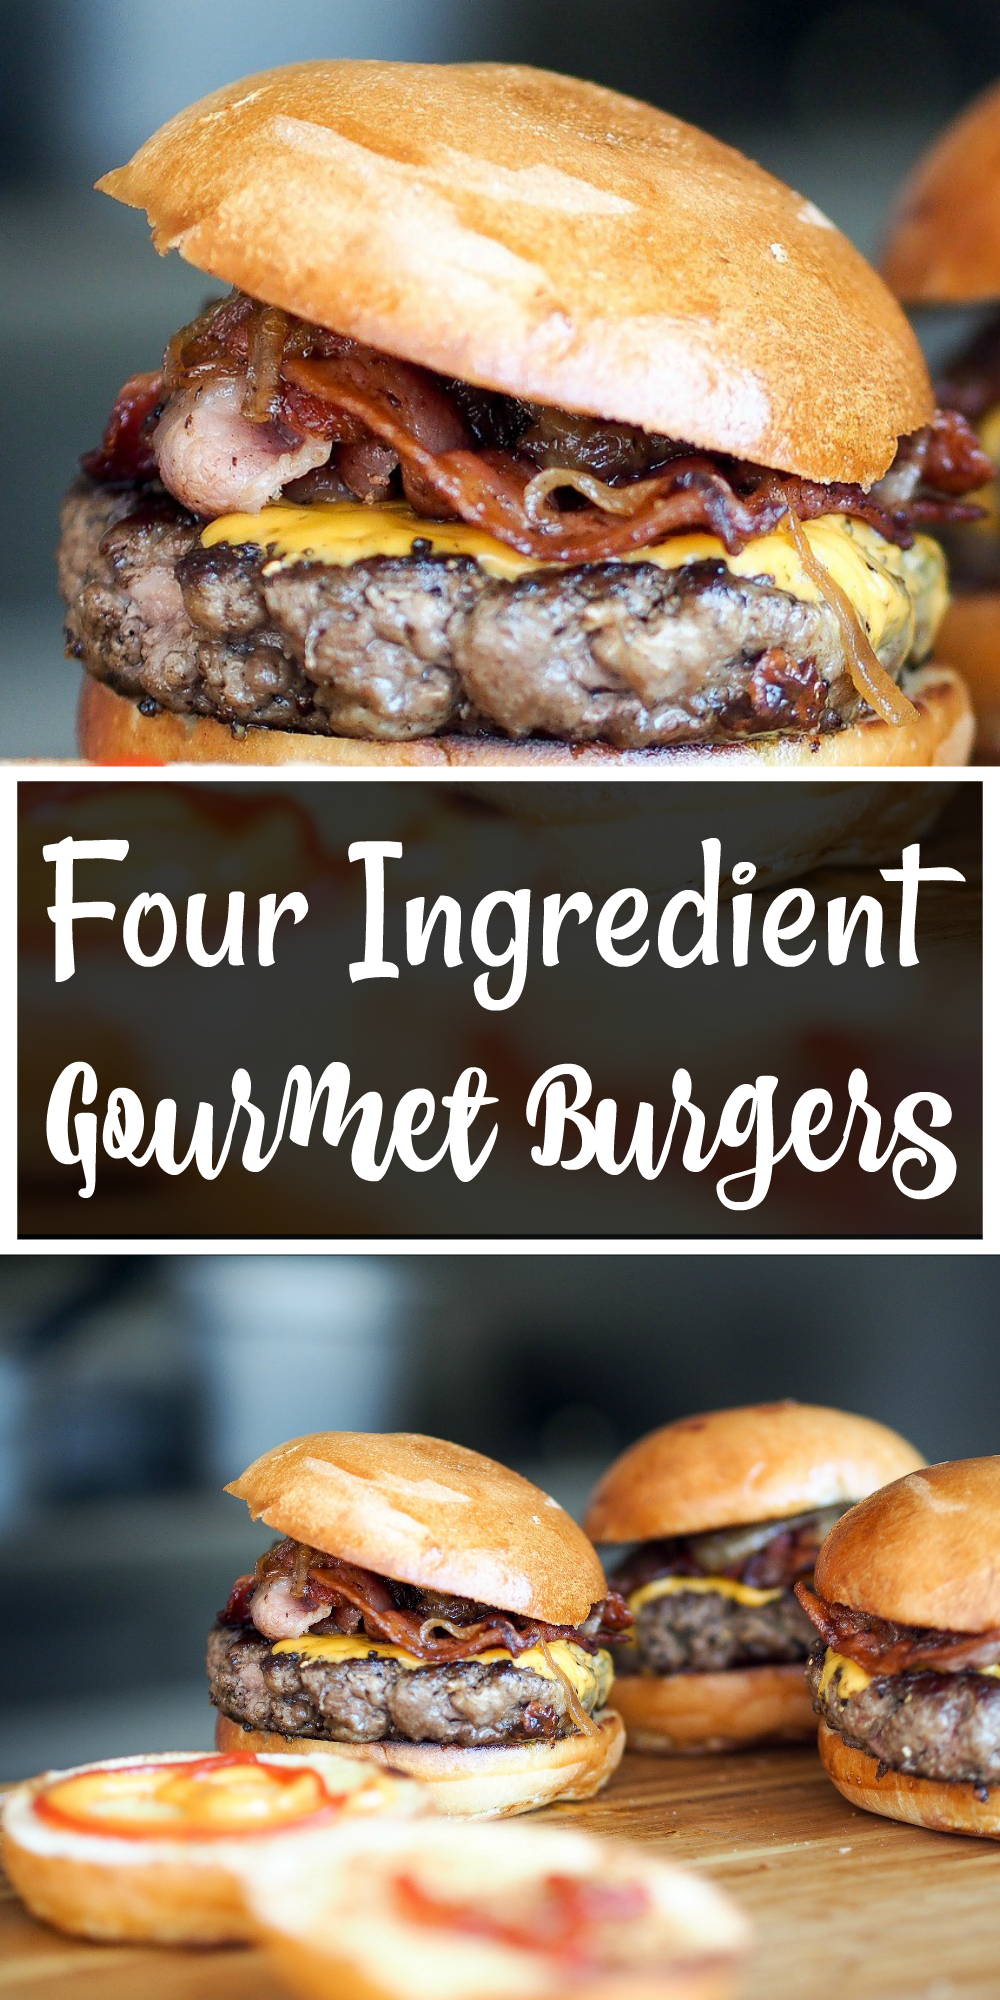 Four Ingredient Gourmet Burgers (The quick and tasty burger hack ...